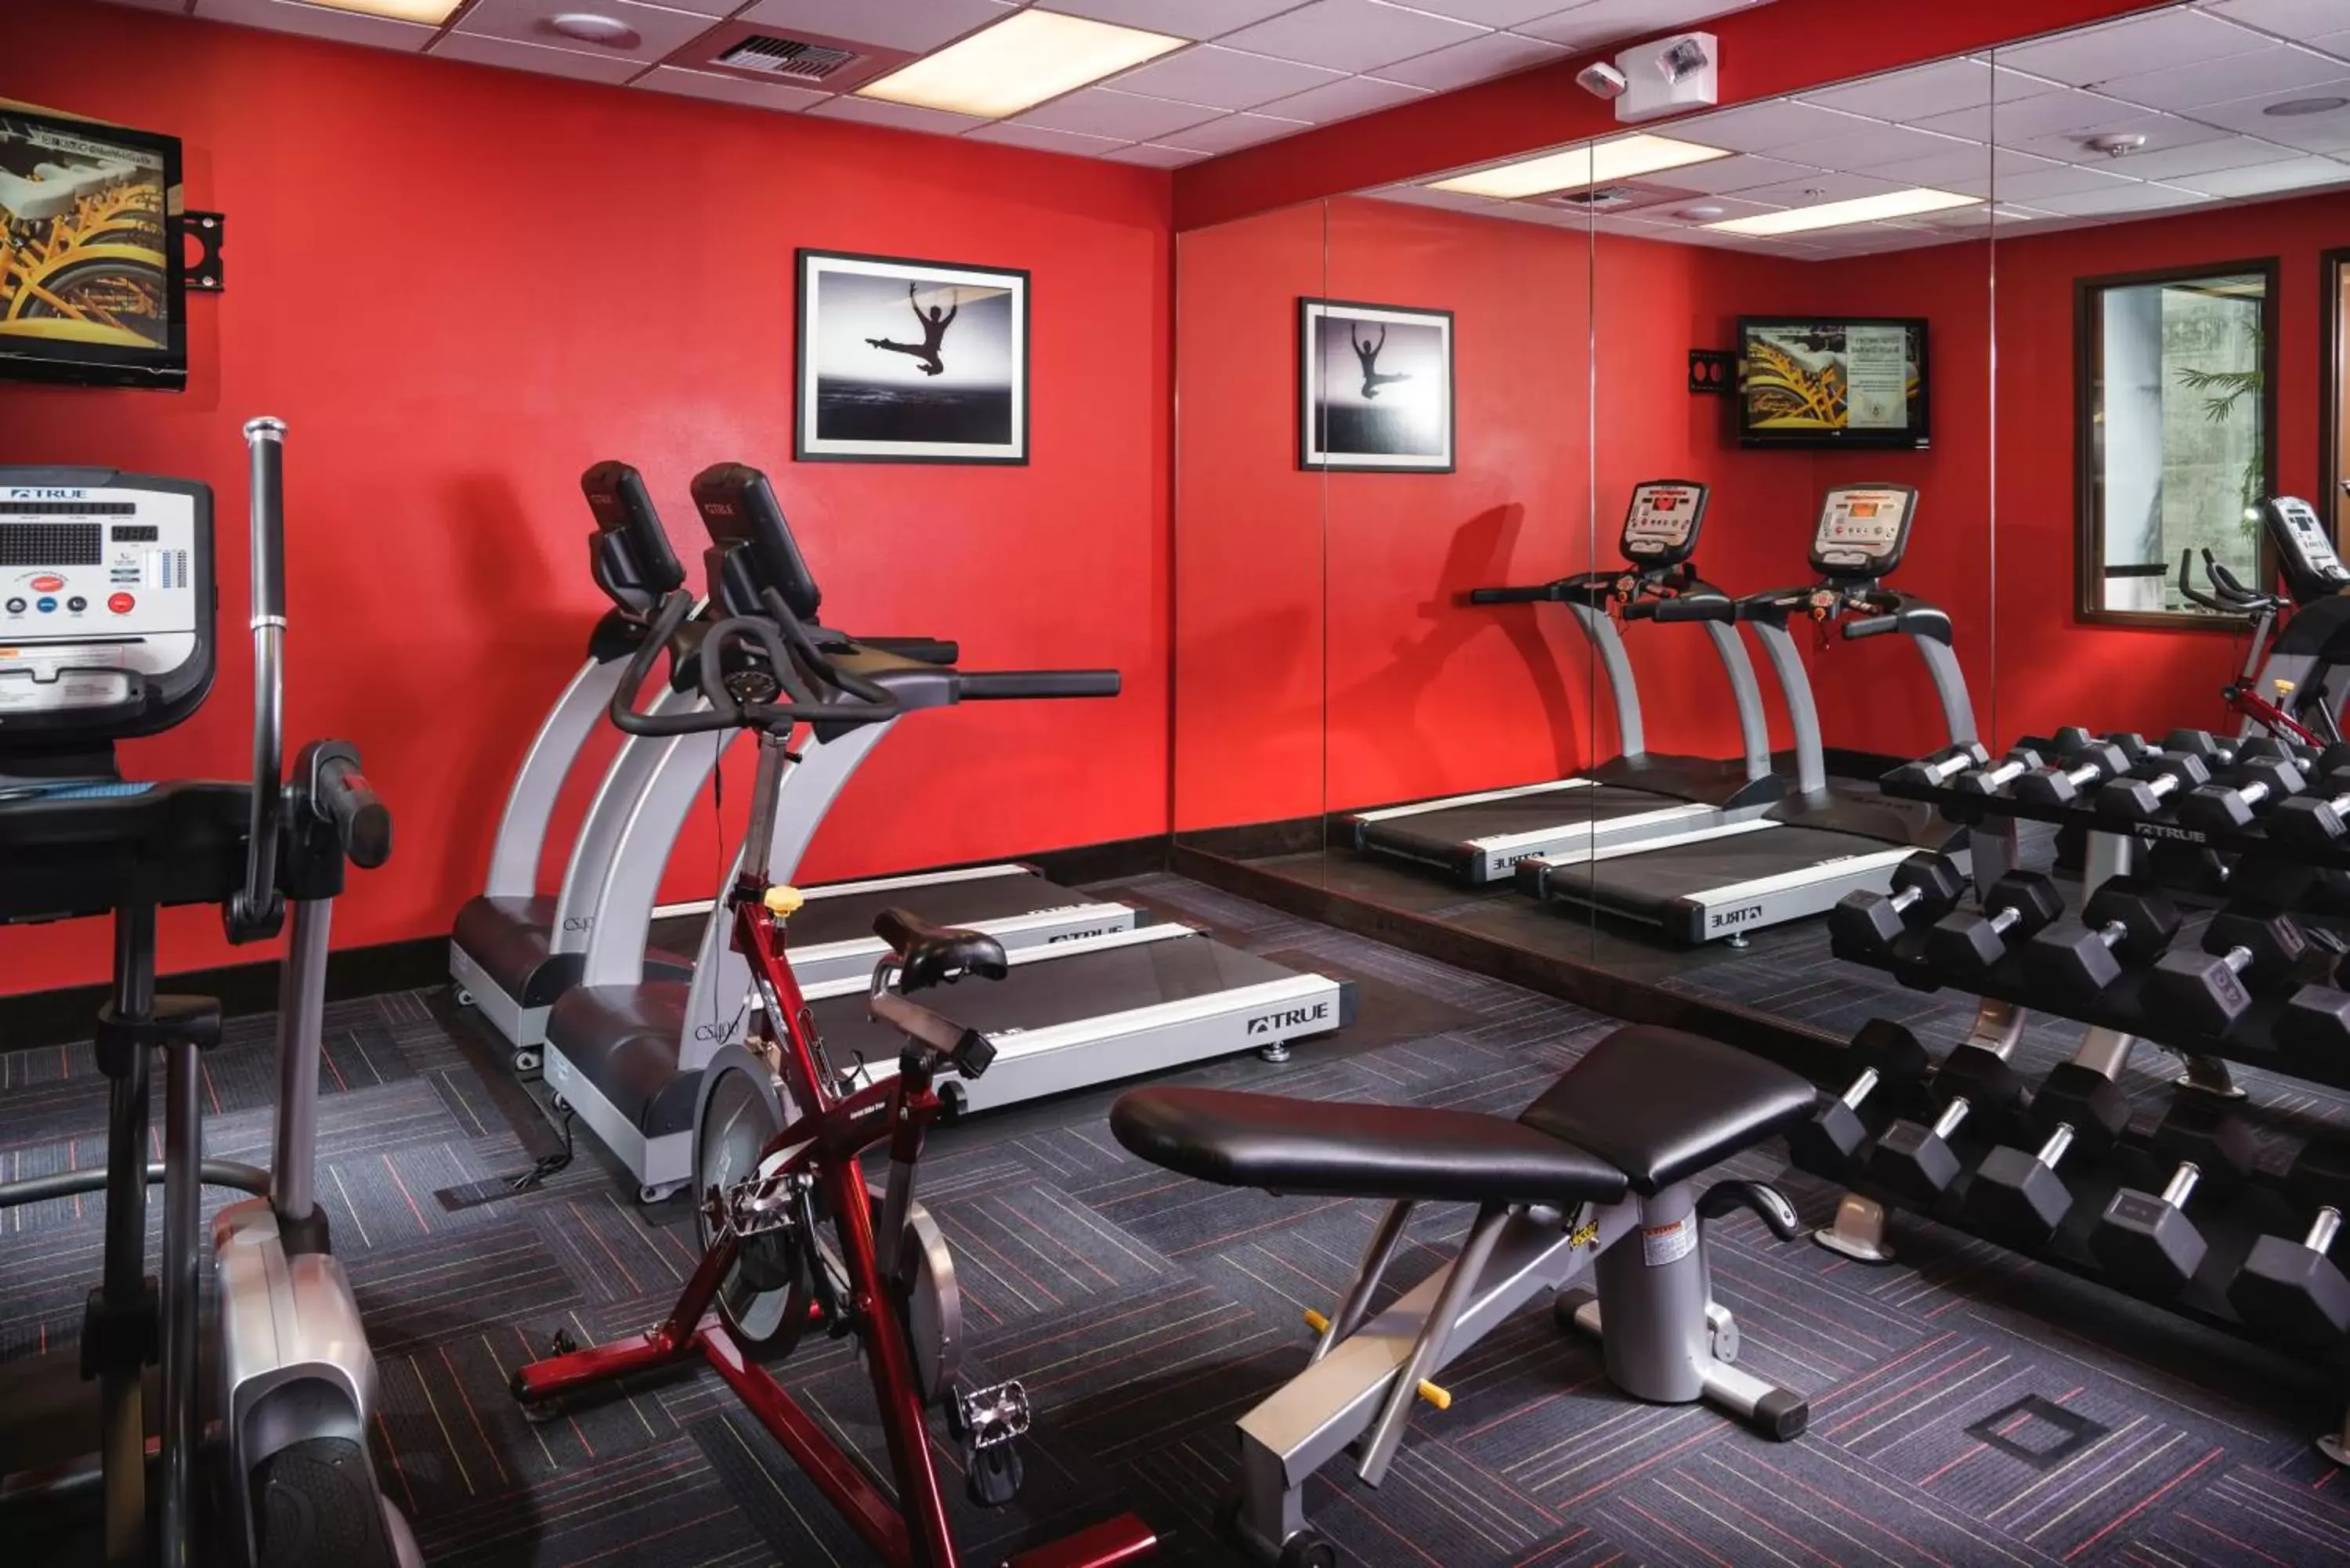 Fitness centre/facilities, Fitness Center/Facilities in Staypineapple, The Maxwell Hotel, Seattle Center Seattle